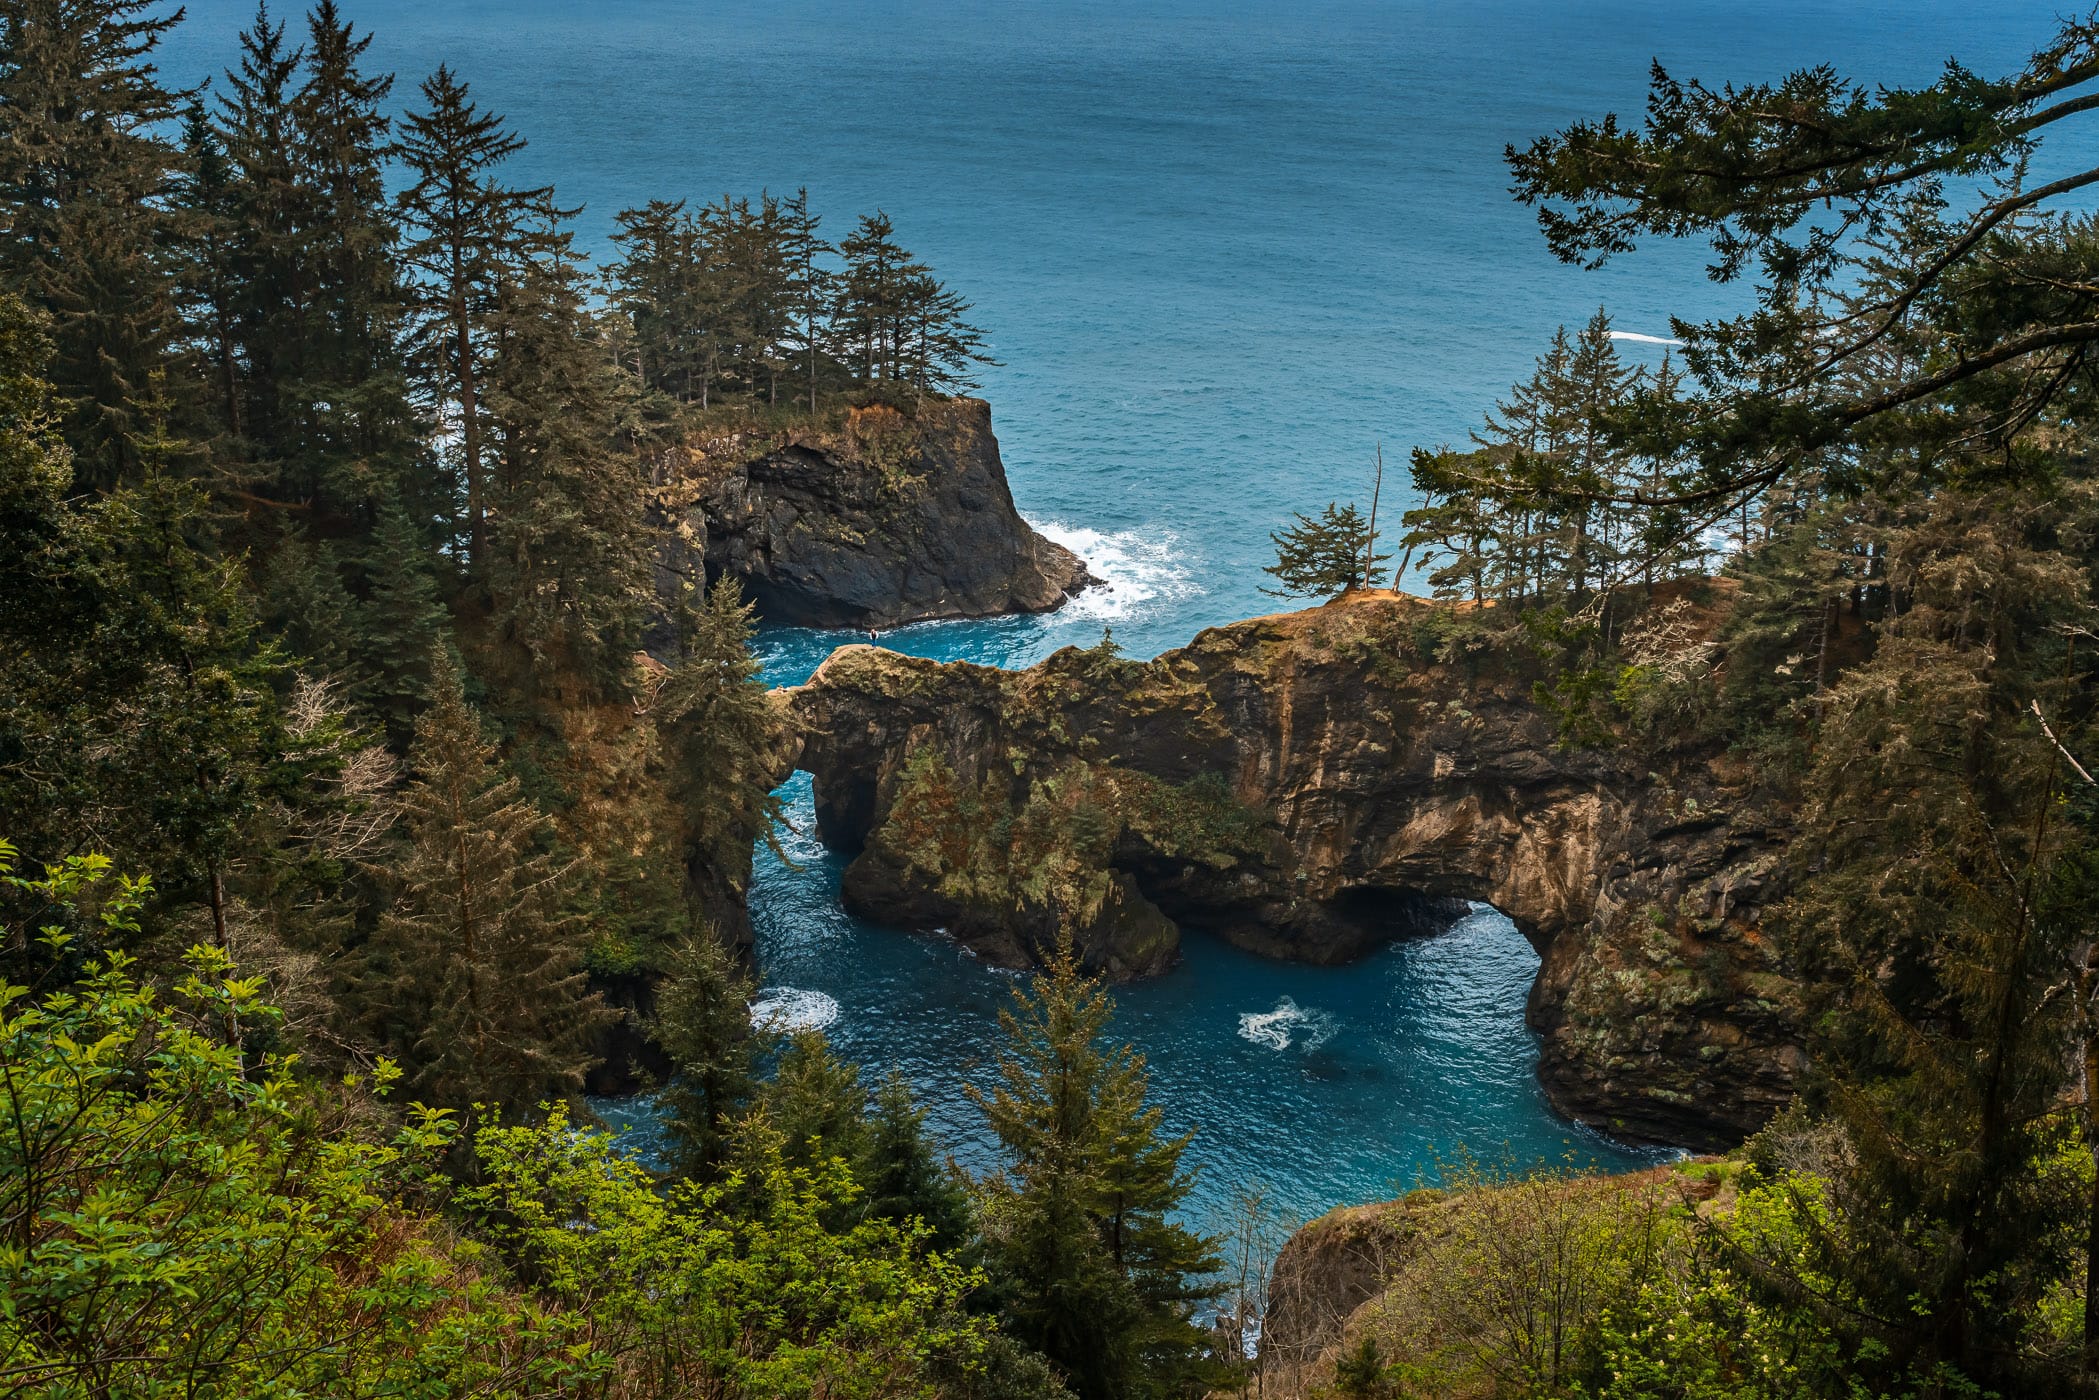 The Natural Bridges rock formation in the Pacific Ocean surf near Brookings, Oregon.